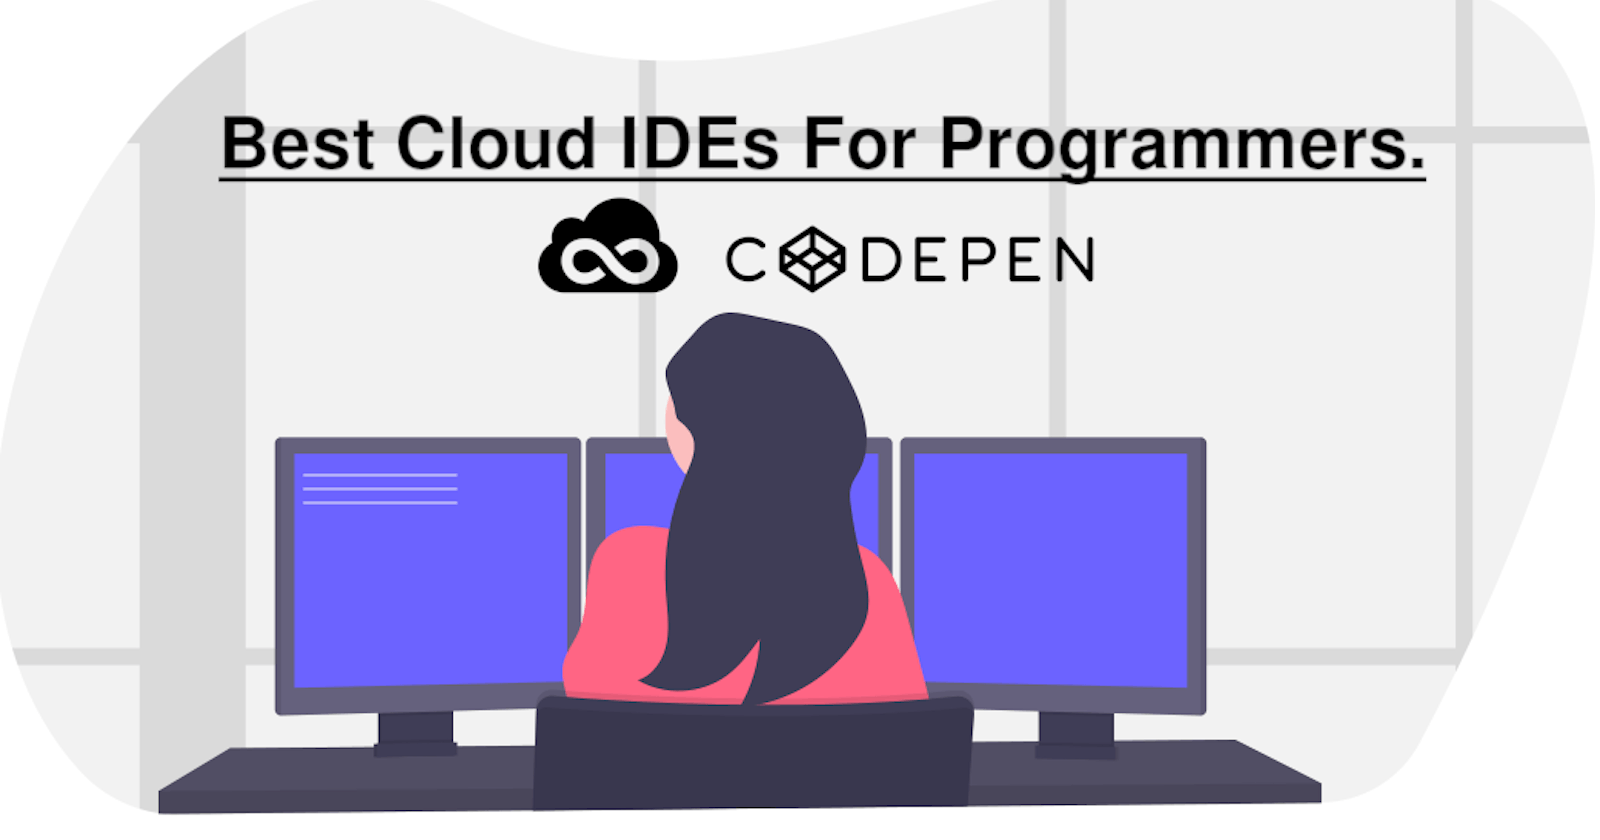 Best Cloud IDEs for Programmers.